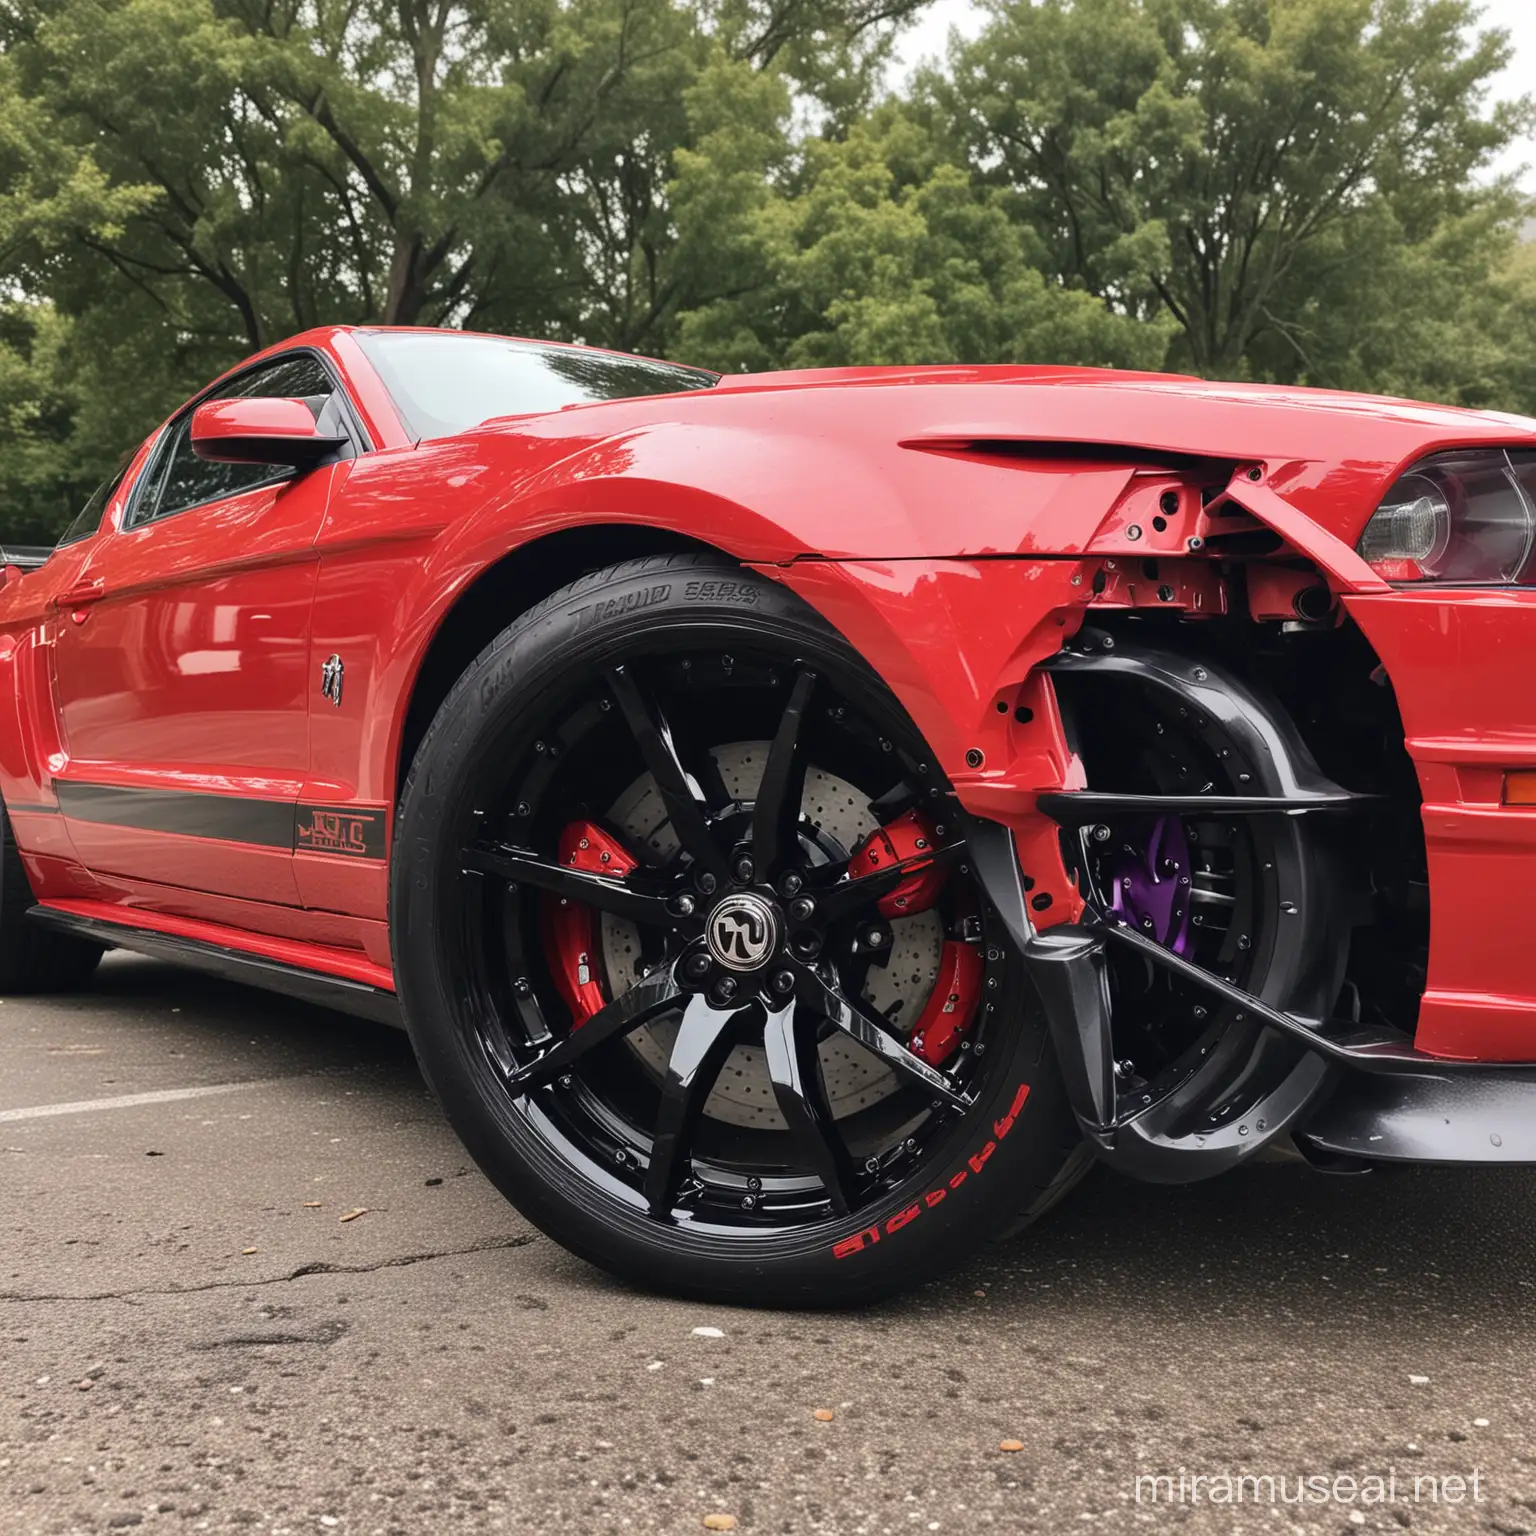 Sleek Red Mustang Car with Black Rims and Purple Caliper